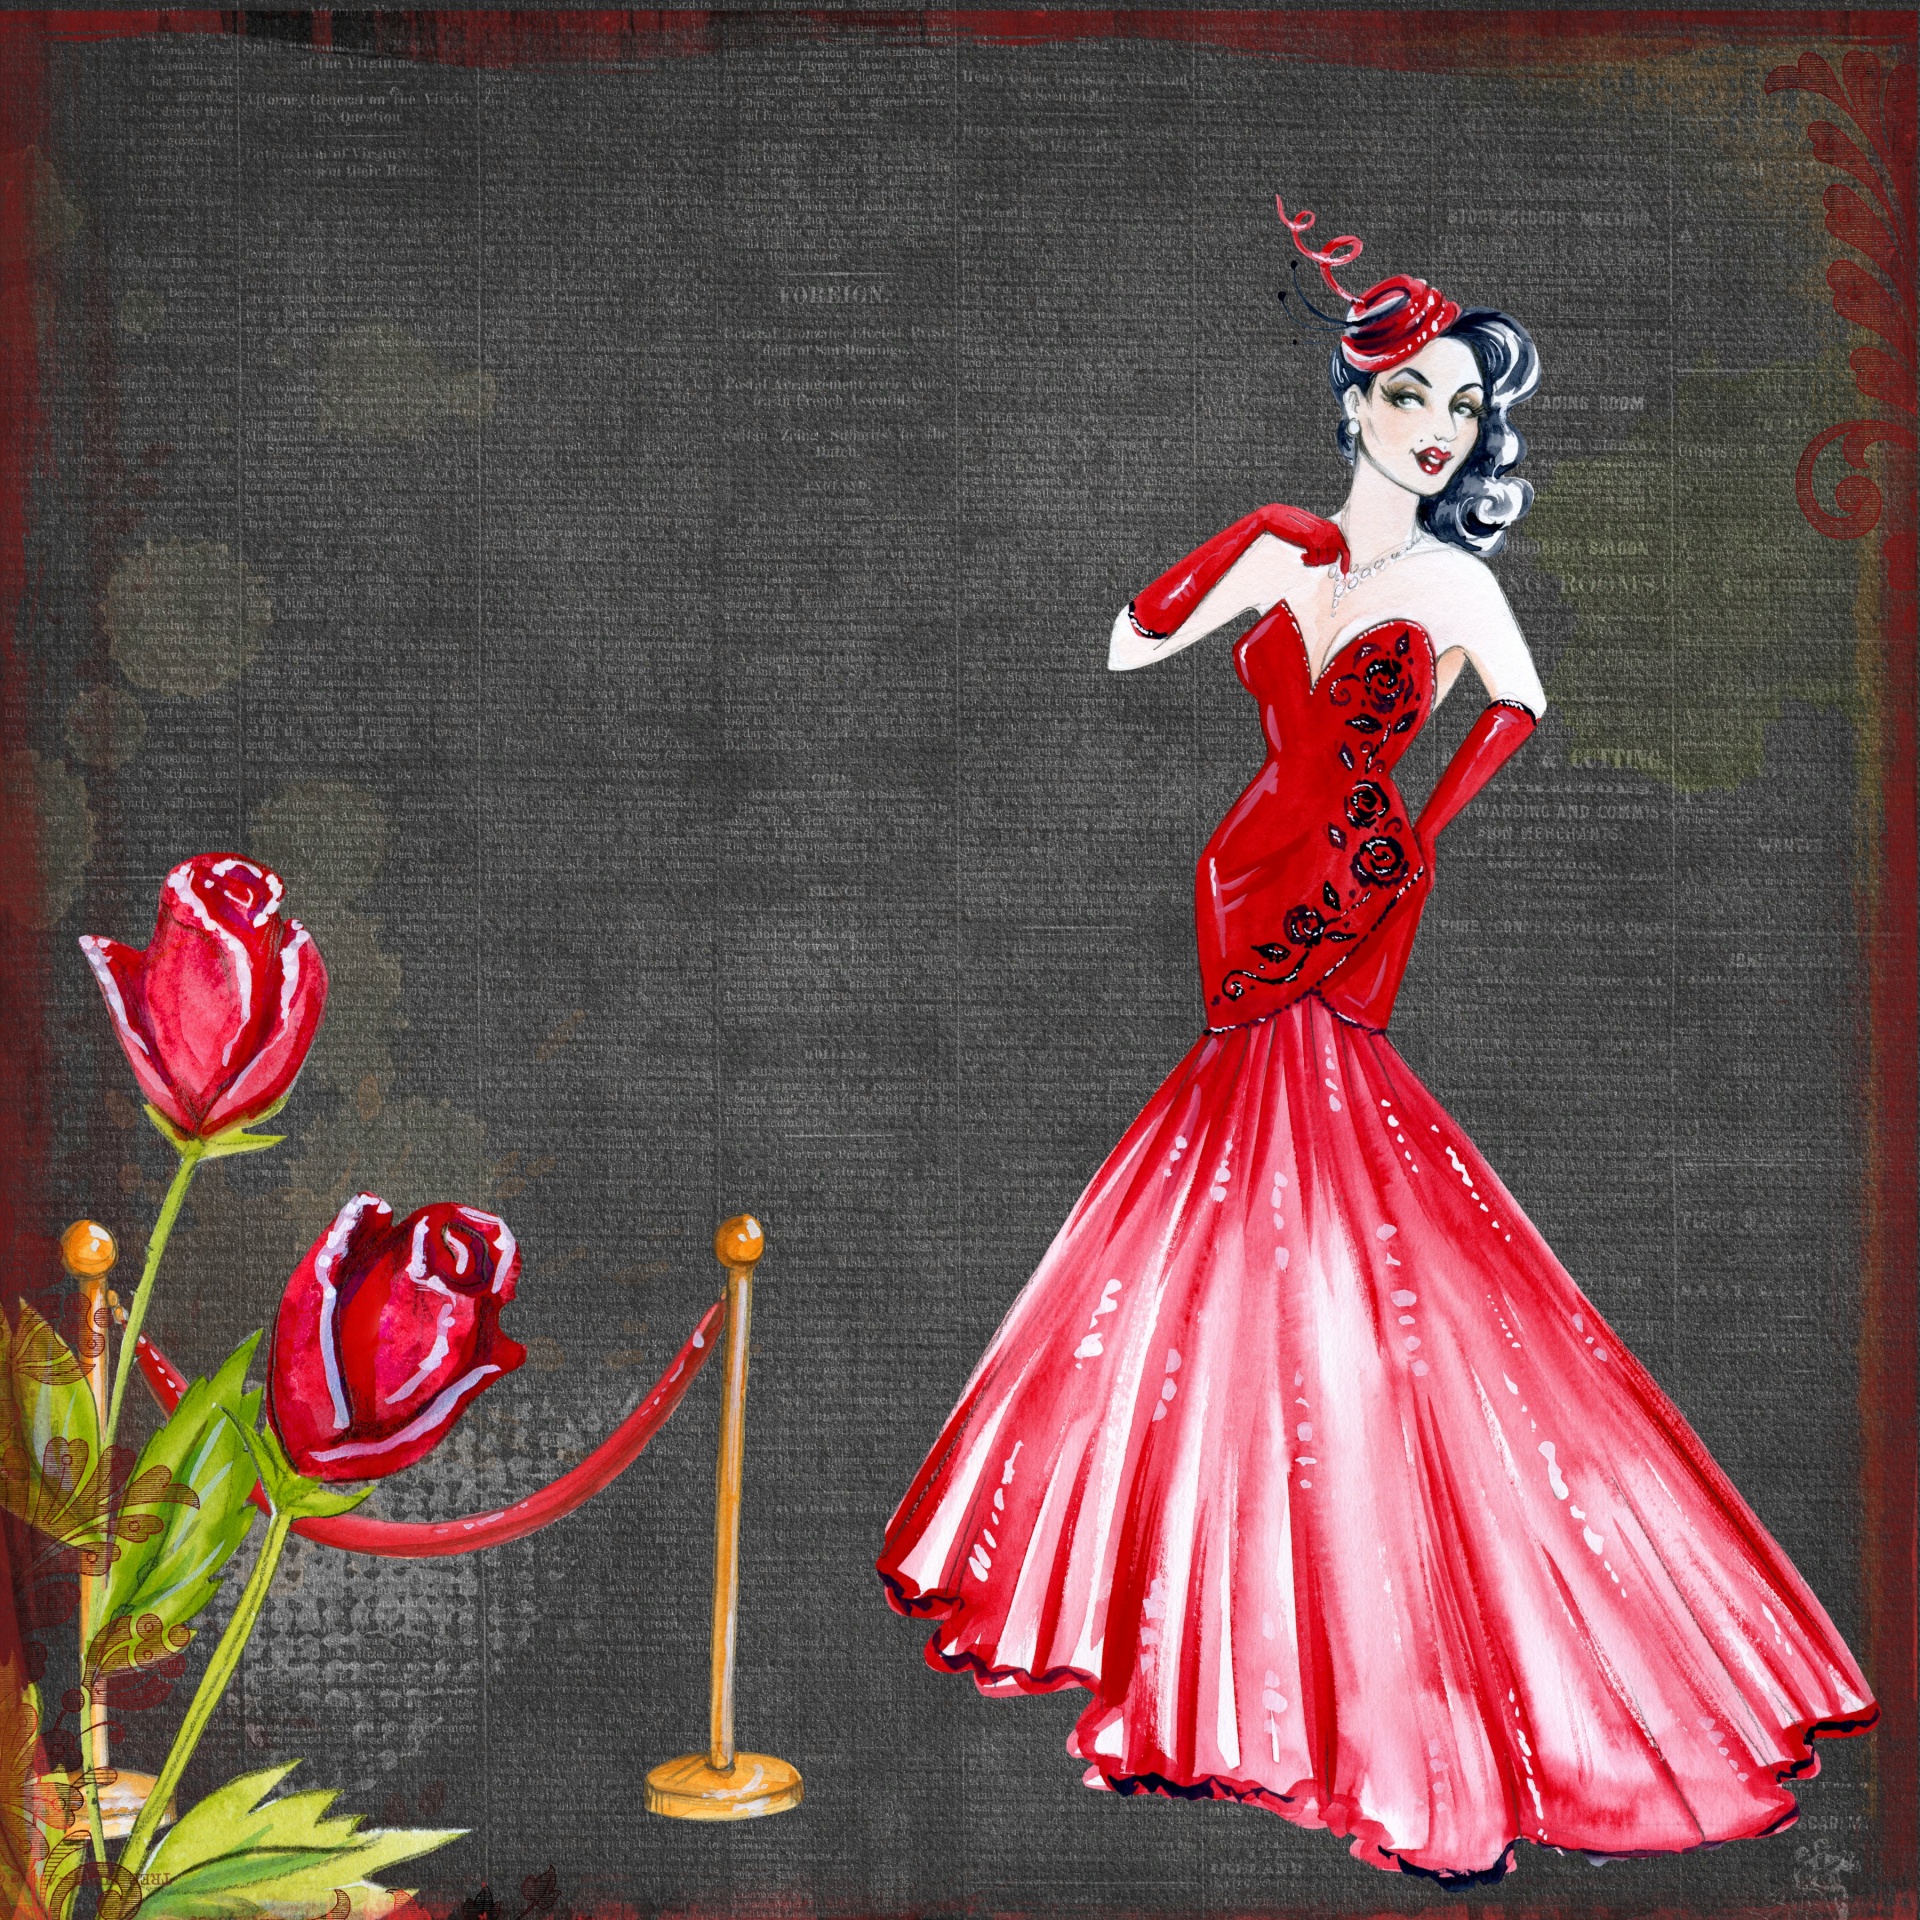 Retro Lady In Red Art Collage Free Stock Photo - Public Domain Pictures